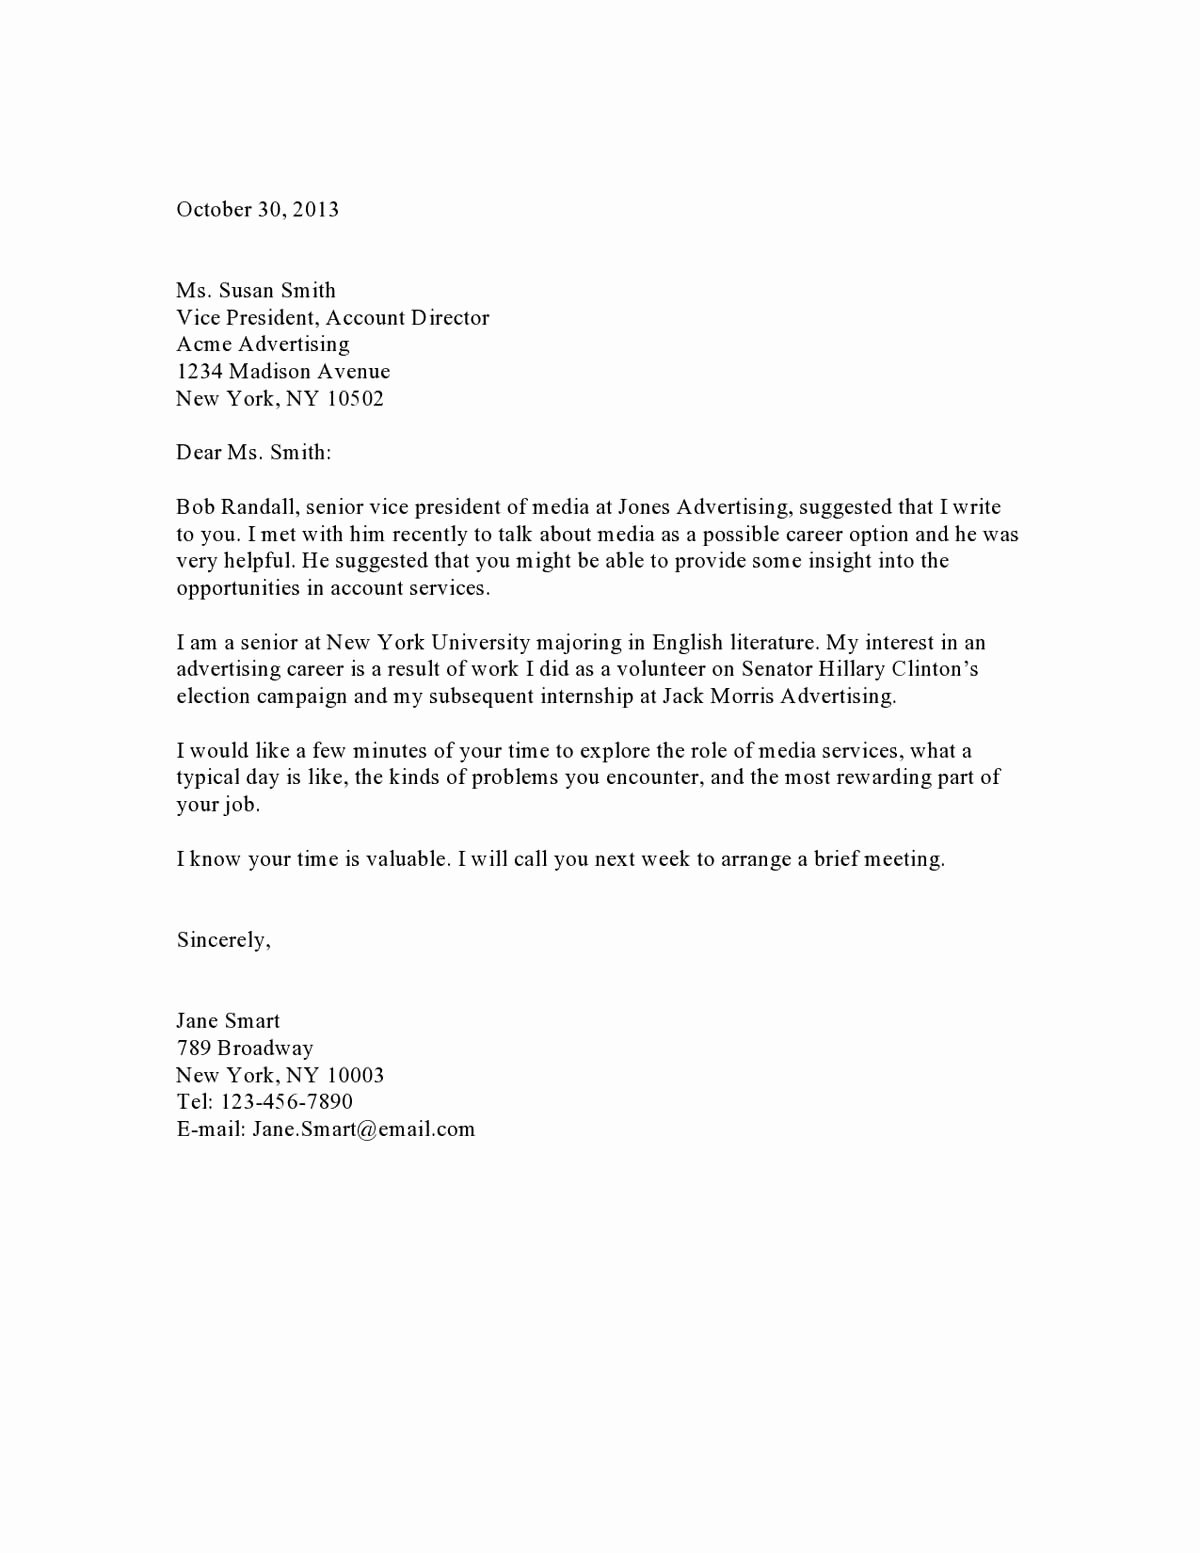 Cover Letter for Employment Best Of Sample Cover Letter for Applying A Job